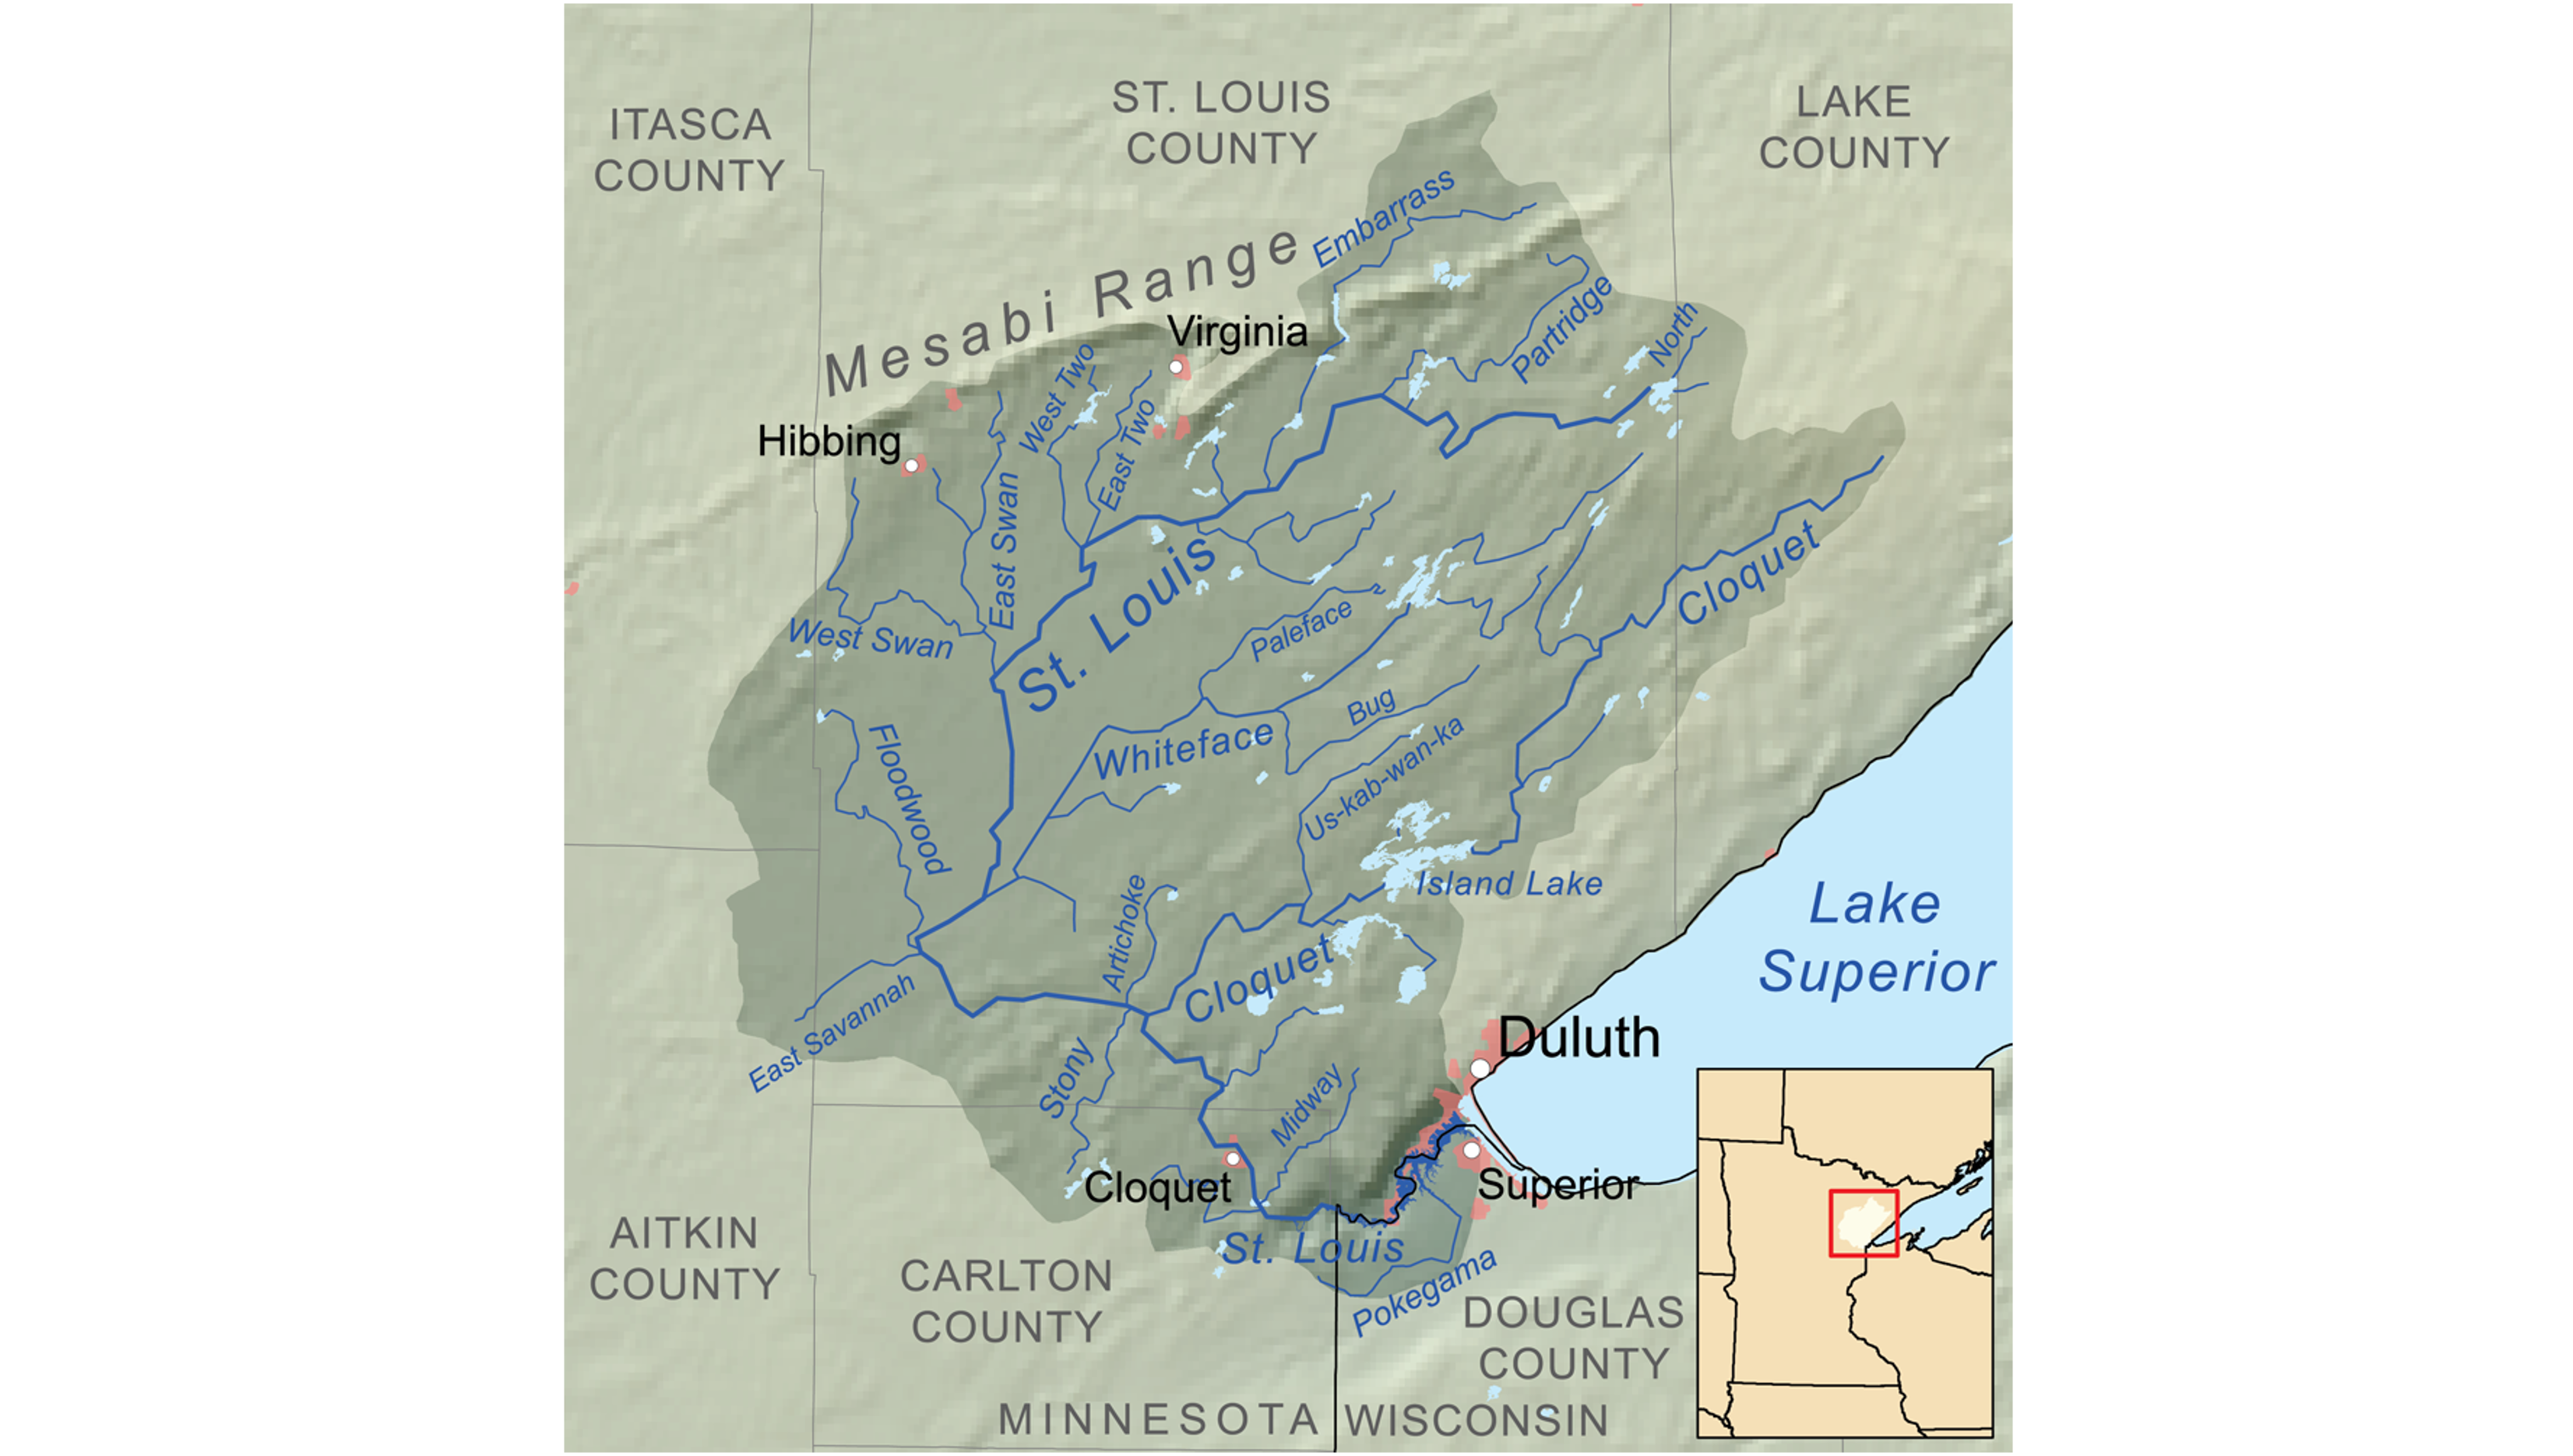 A map depicting the extent of the St. Louis River watershed.